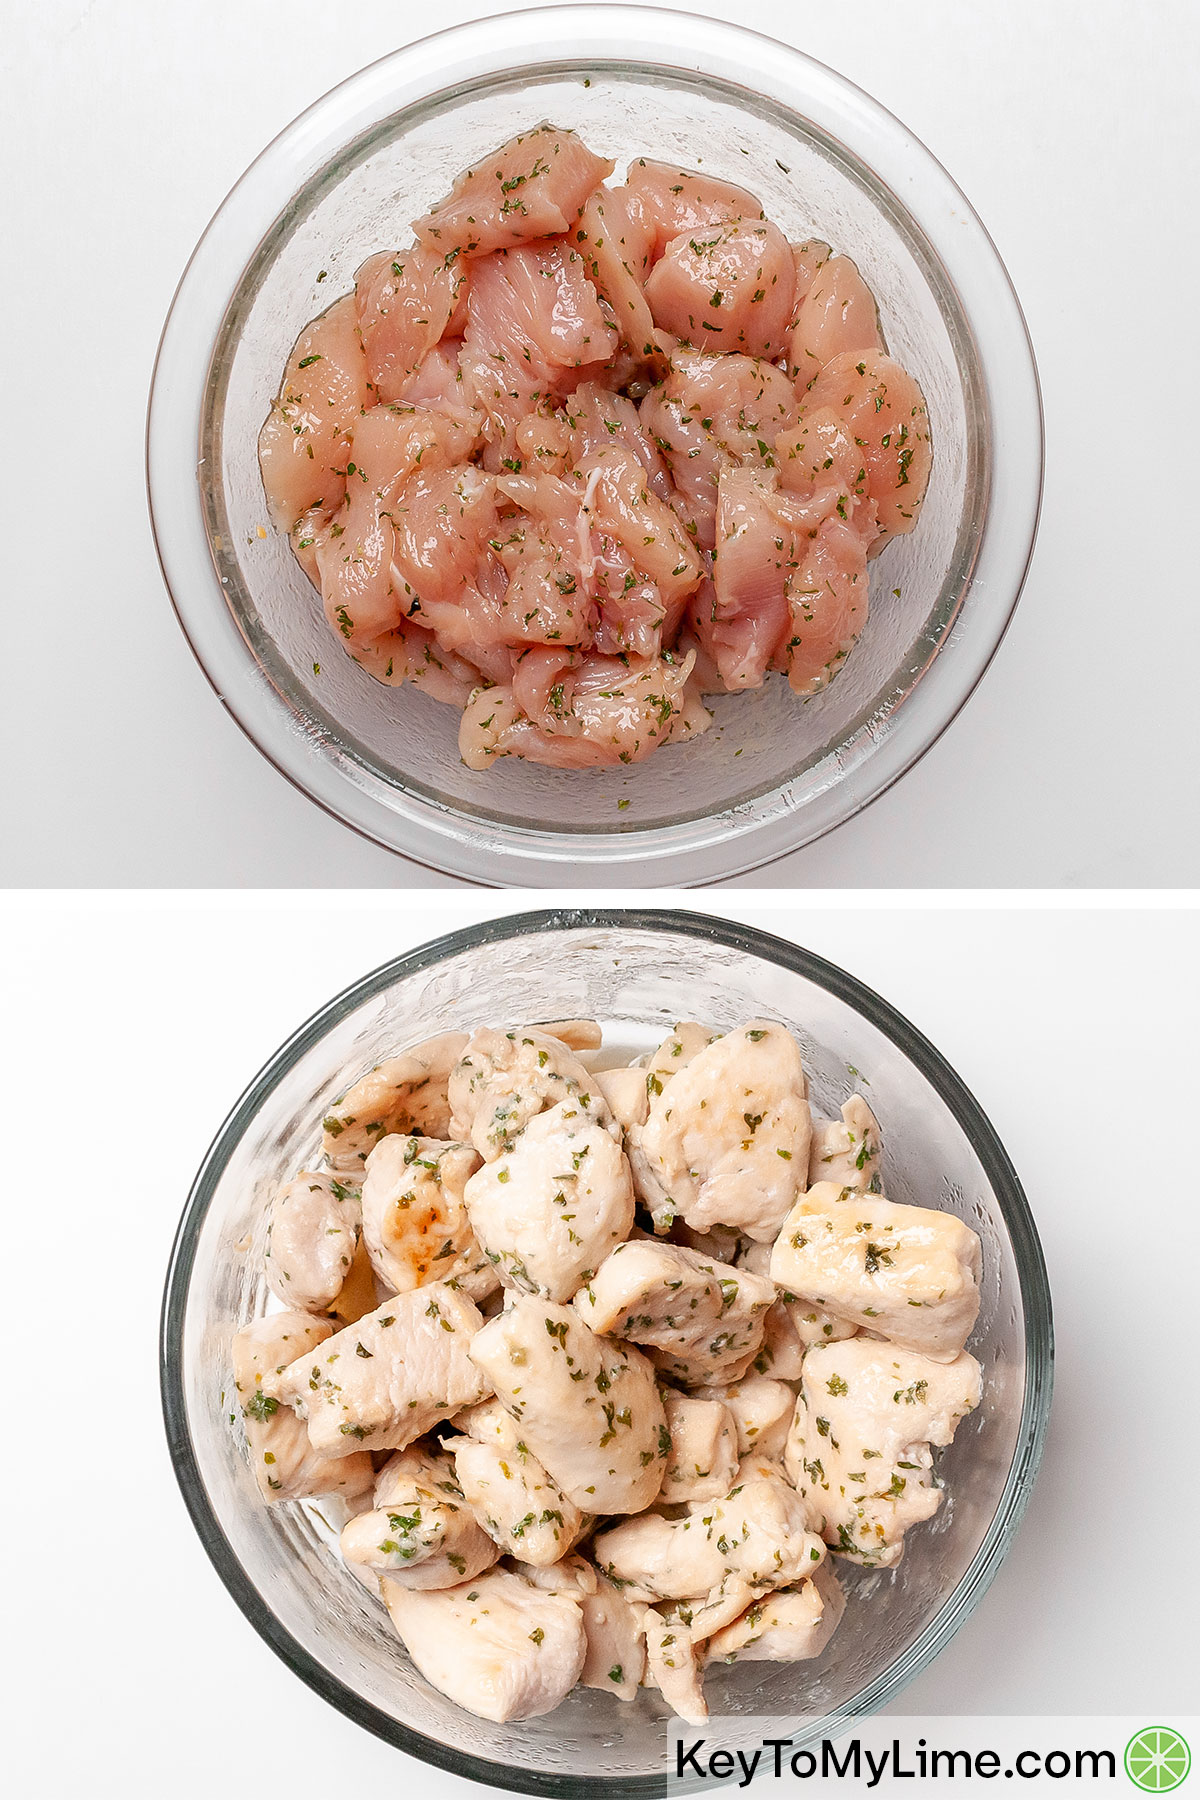 Seasoned chicken breast chunks before and after cooking.